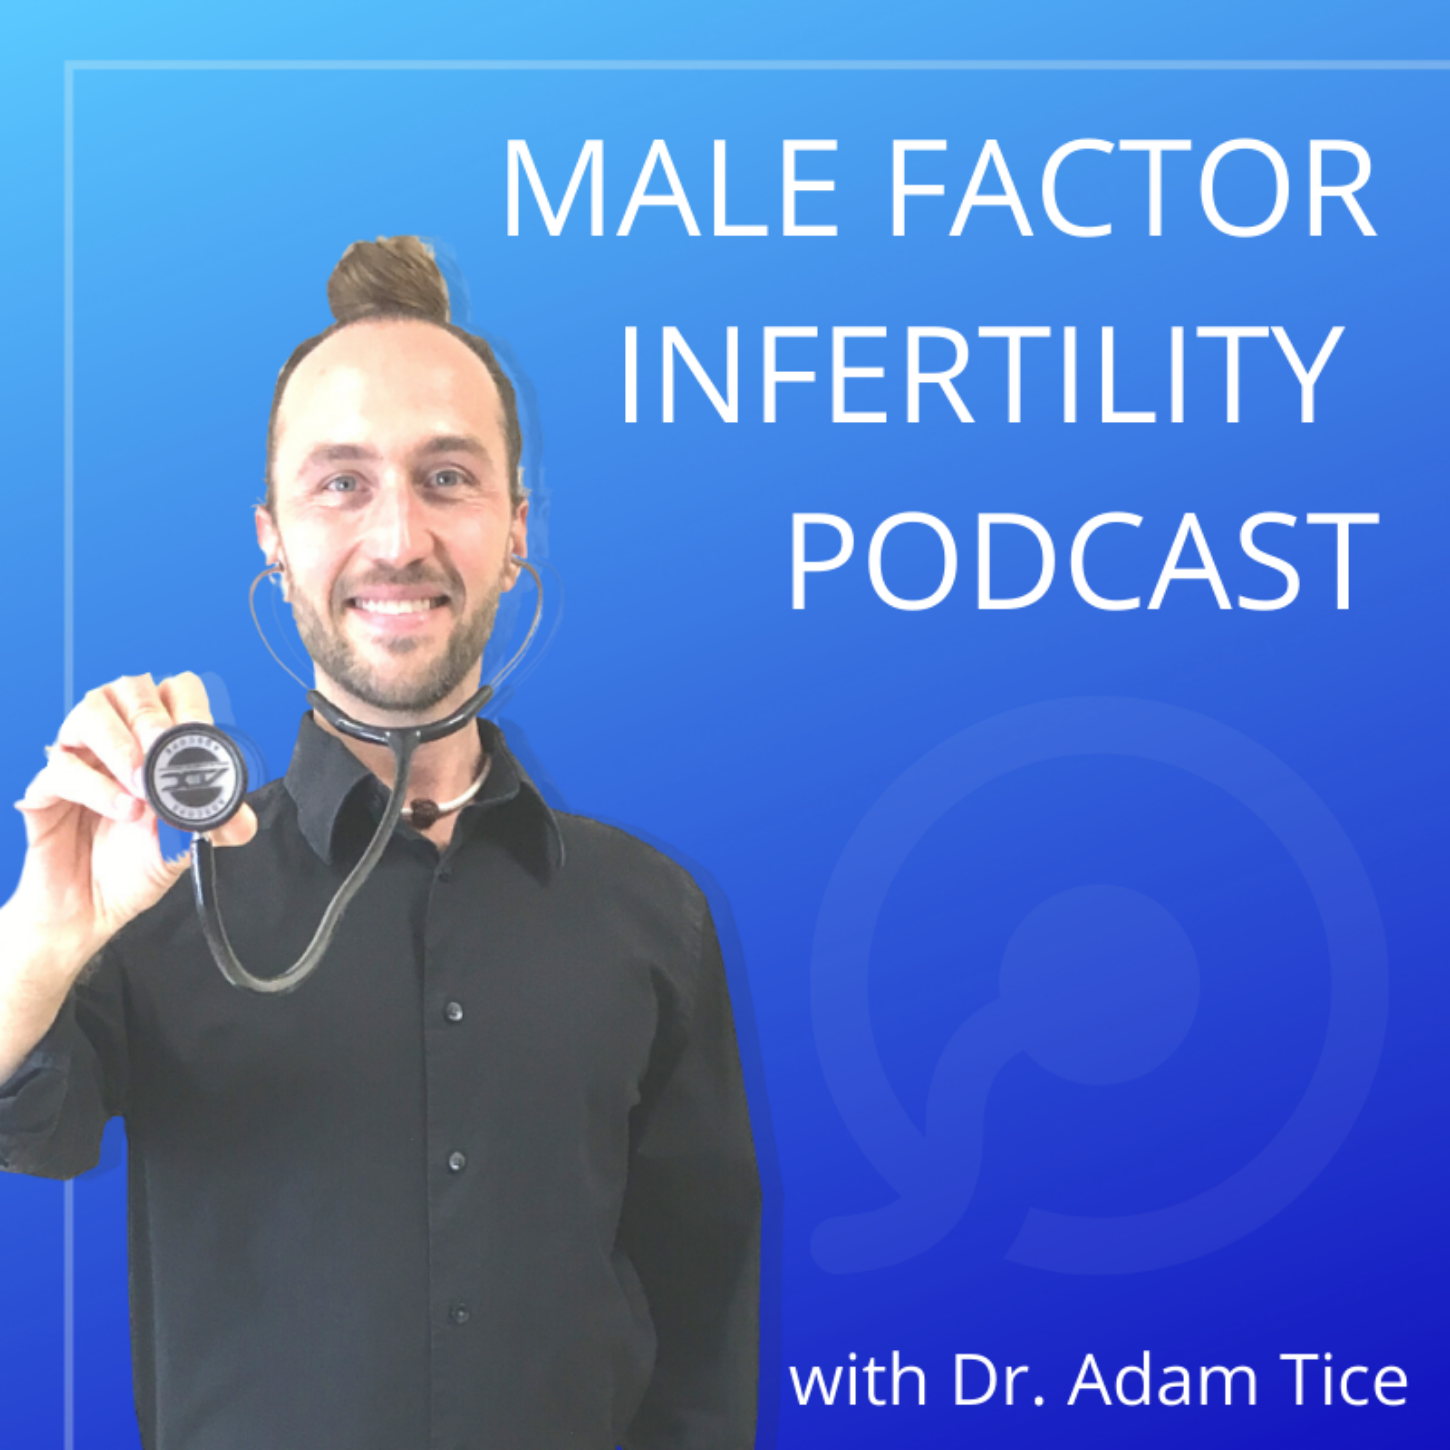 Male Factor Infertility Podcast